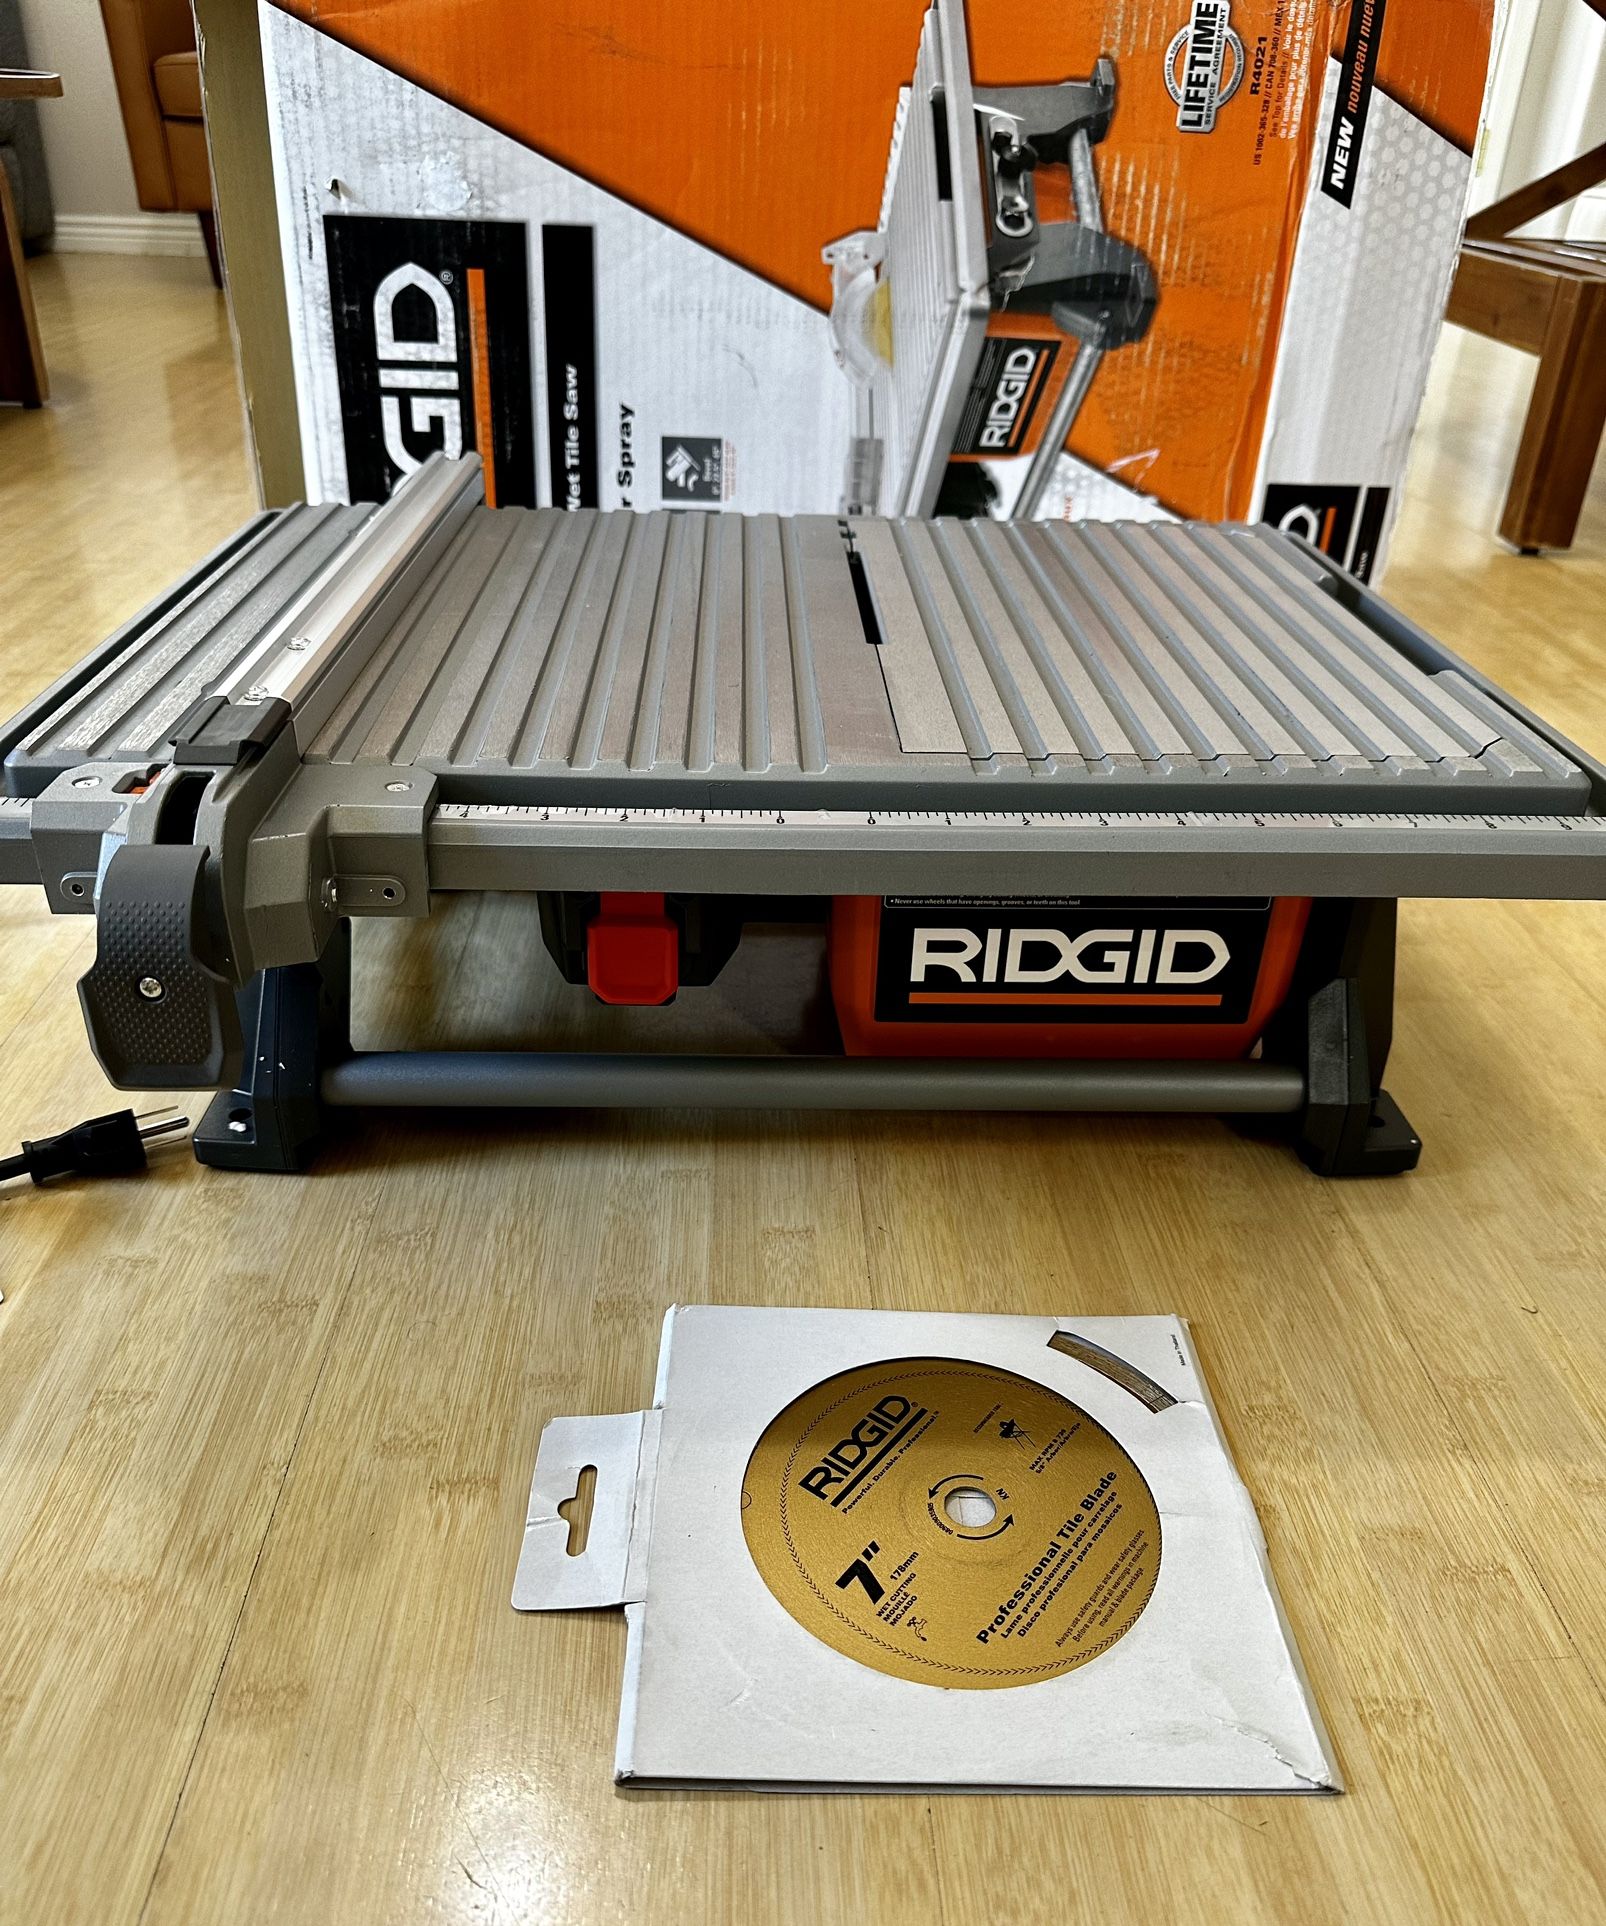 Brand New Ridgid in. Table Top Wet Tile Saw for Sale in Peoria, AZ  OfferUp